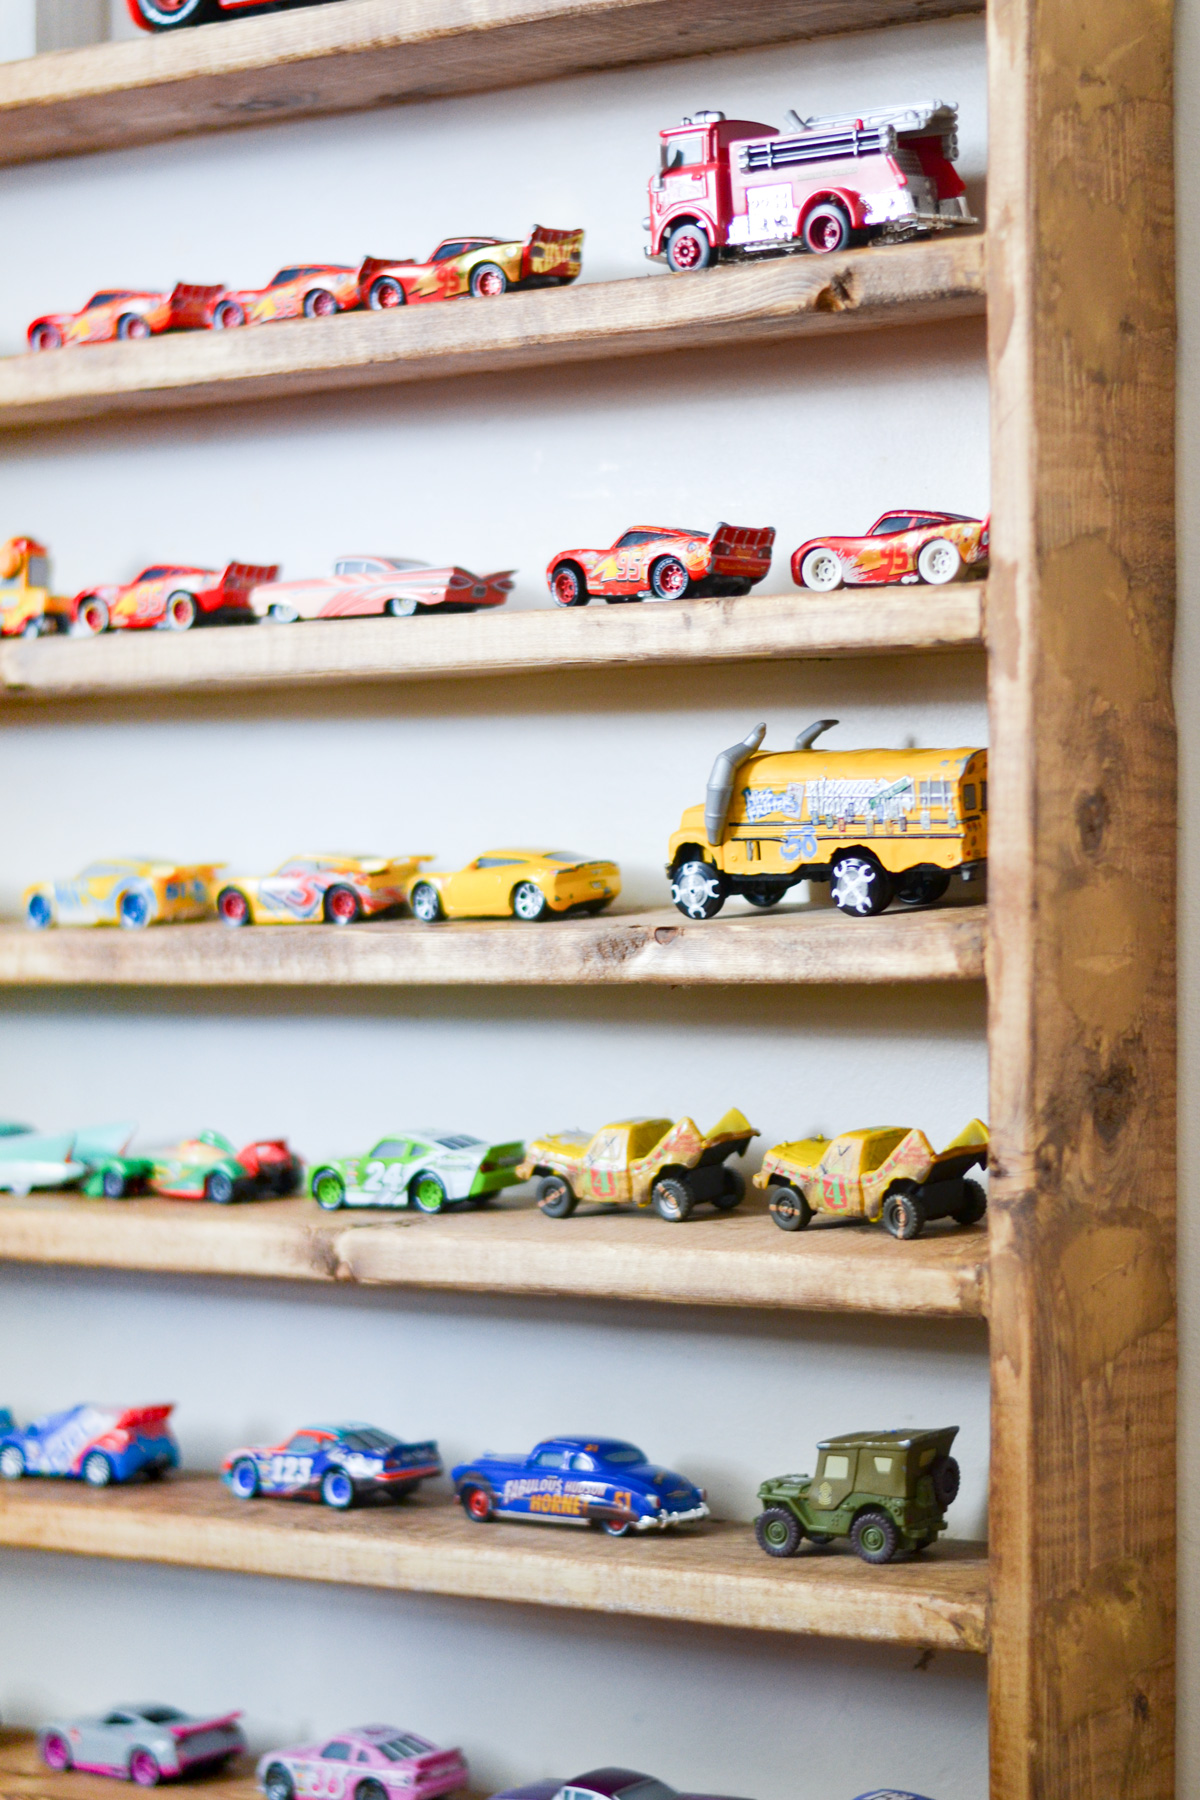 Toy Car Organizer Case: Ideal for Hot Wheels and Matchbox Cars Storage